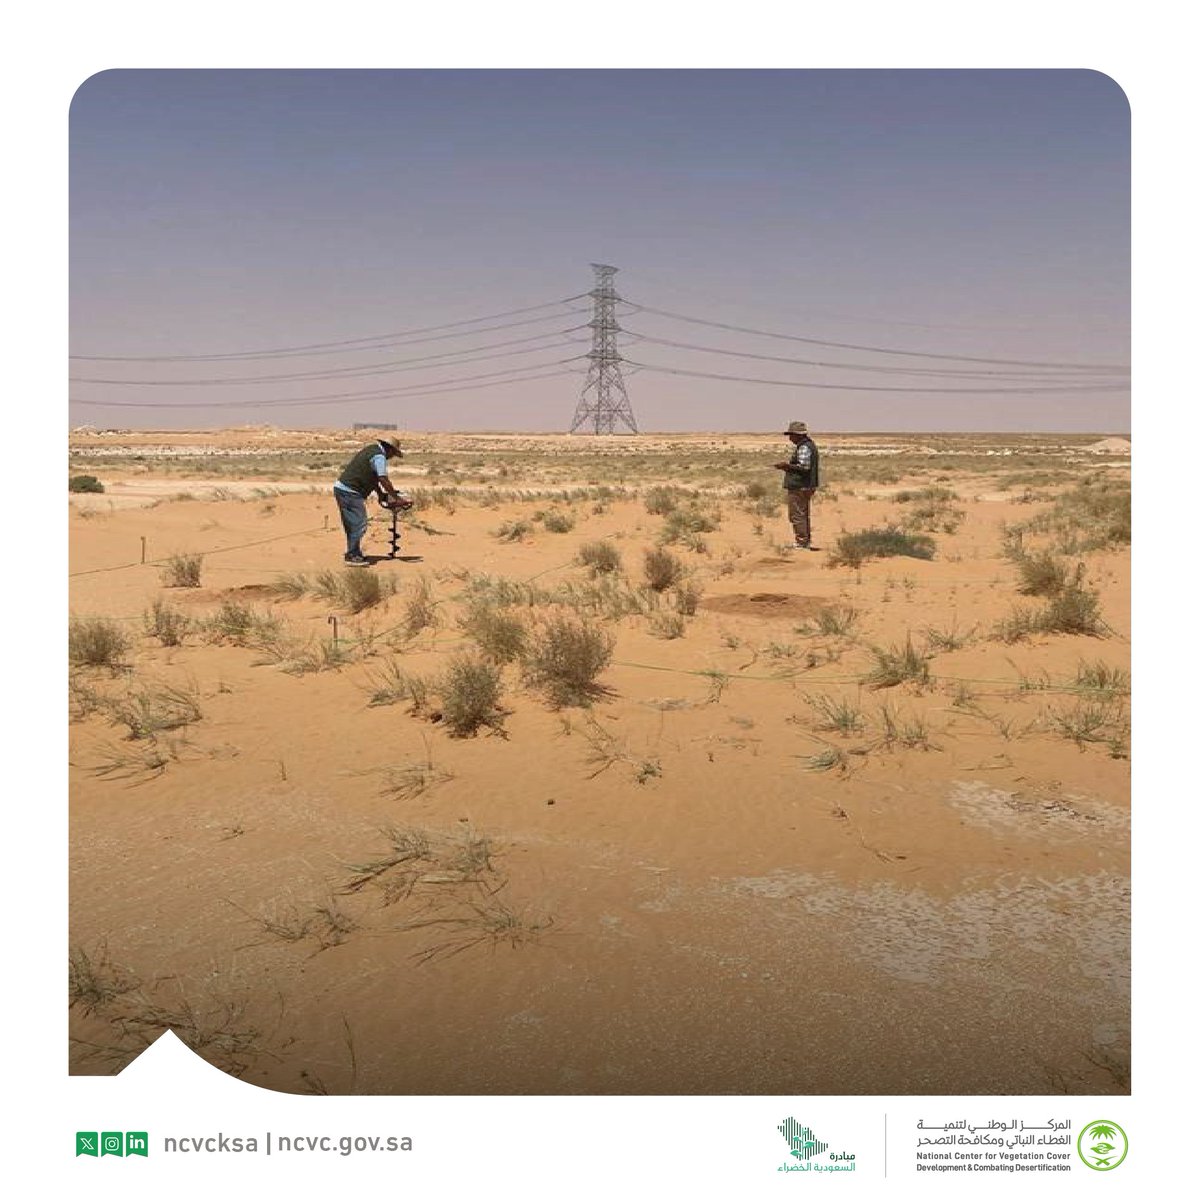 The Center’s combating desertification teams have started the second phase of the project assessing desertification and land degradation in the Kingdom. This phase focuses on identifying hotspots, categorizing the conditions and causes of desertification and degradation, and